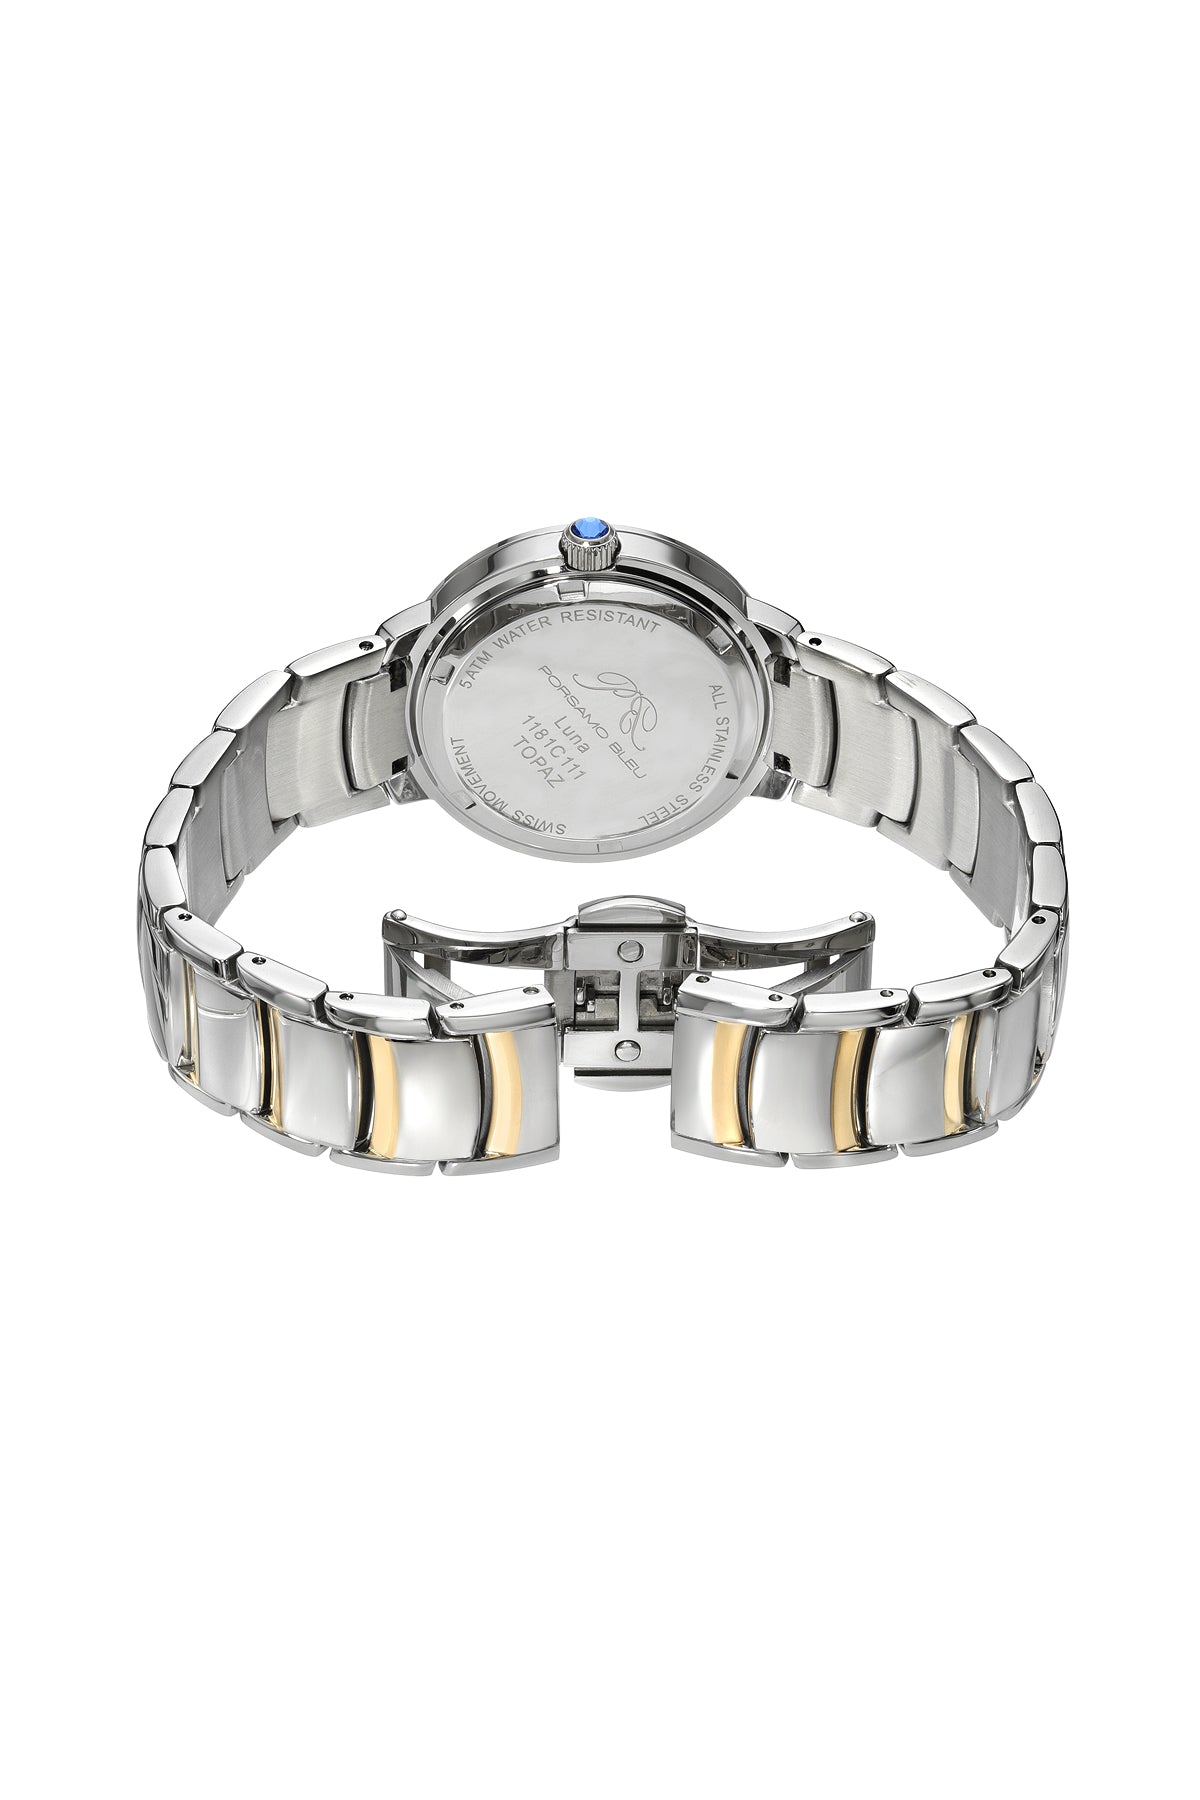 Porsamo Bleu Luna Luxury Topaz Women's Stainless Steel Watch, Two-Tone, White With Flinque Guilloche Dial 1181CLUS